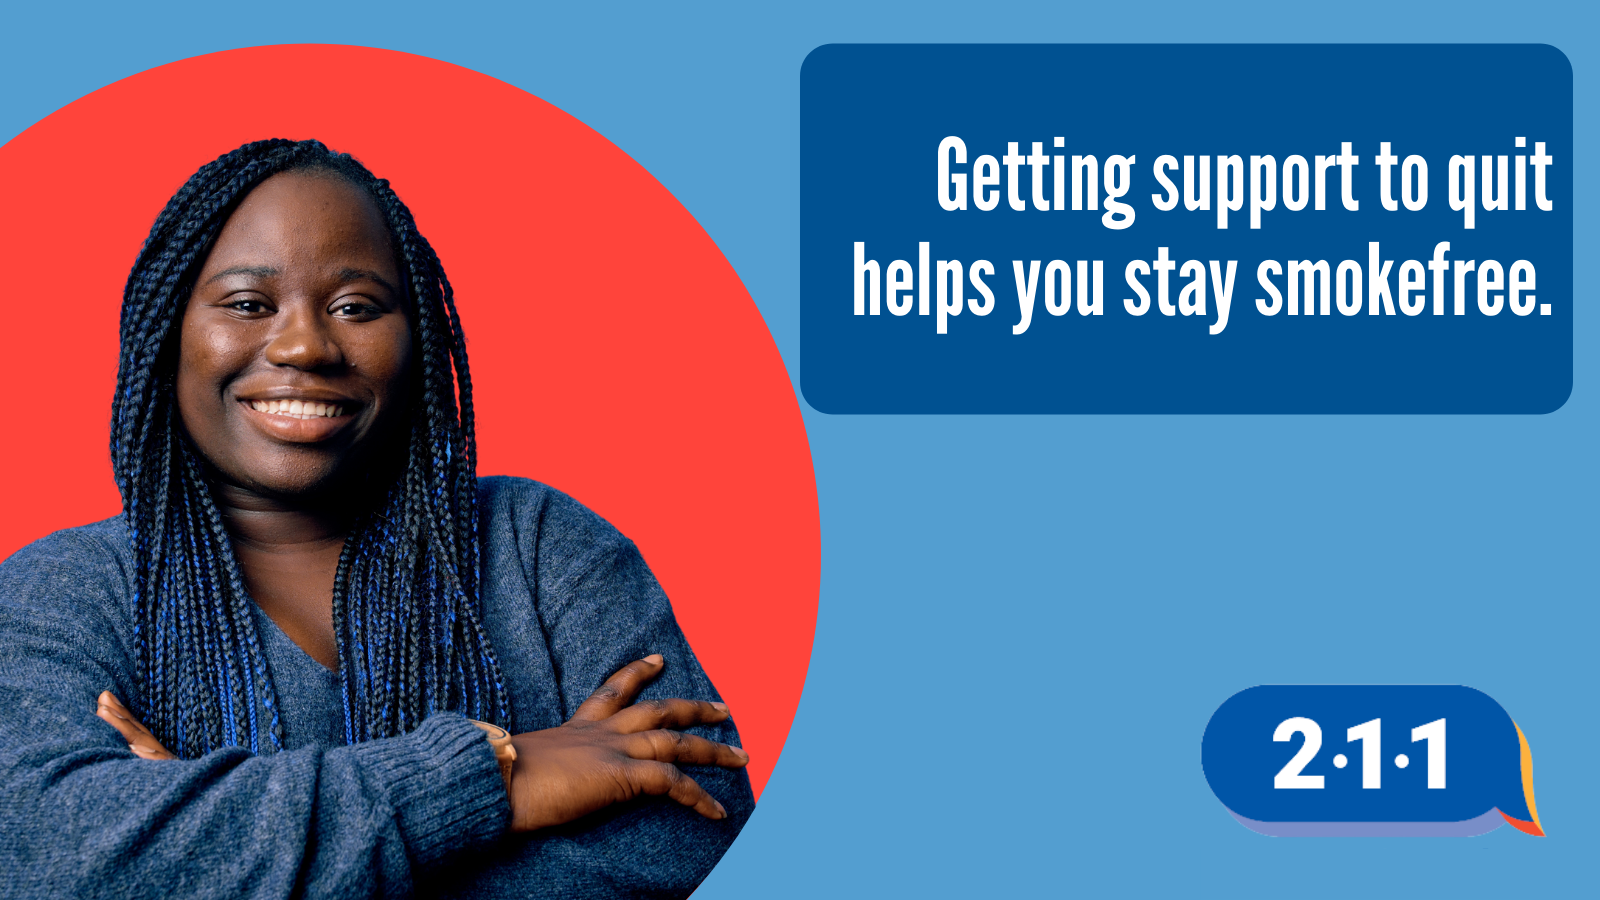 Smiling African American woman and text: Getting support to quit helps you stay smoke-free. 2-1-1